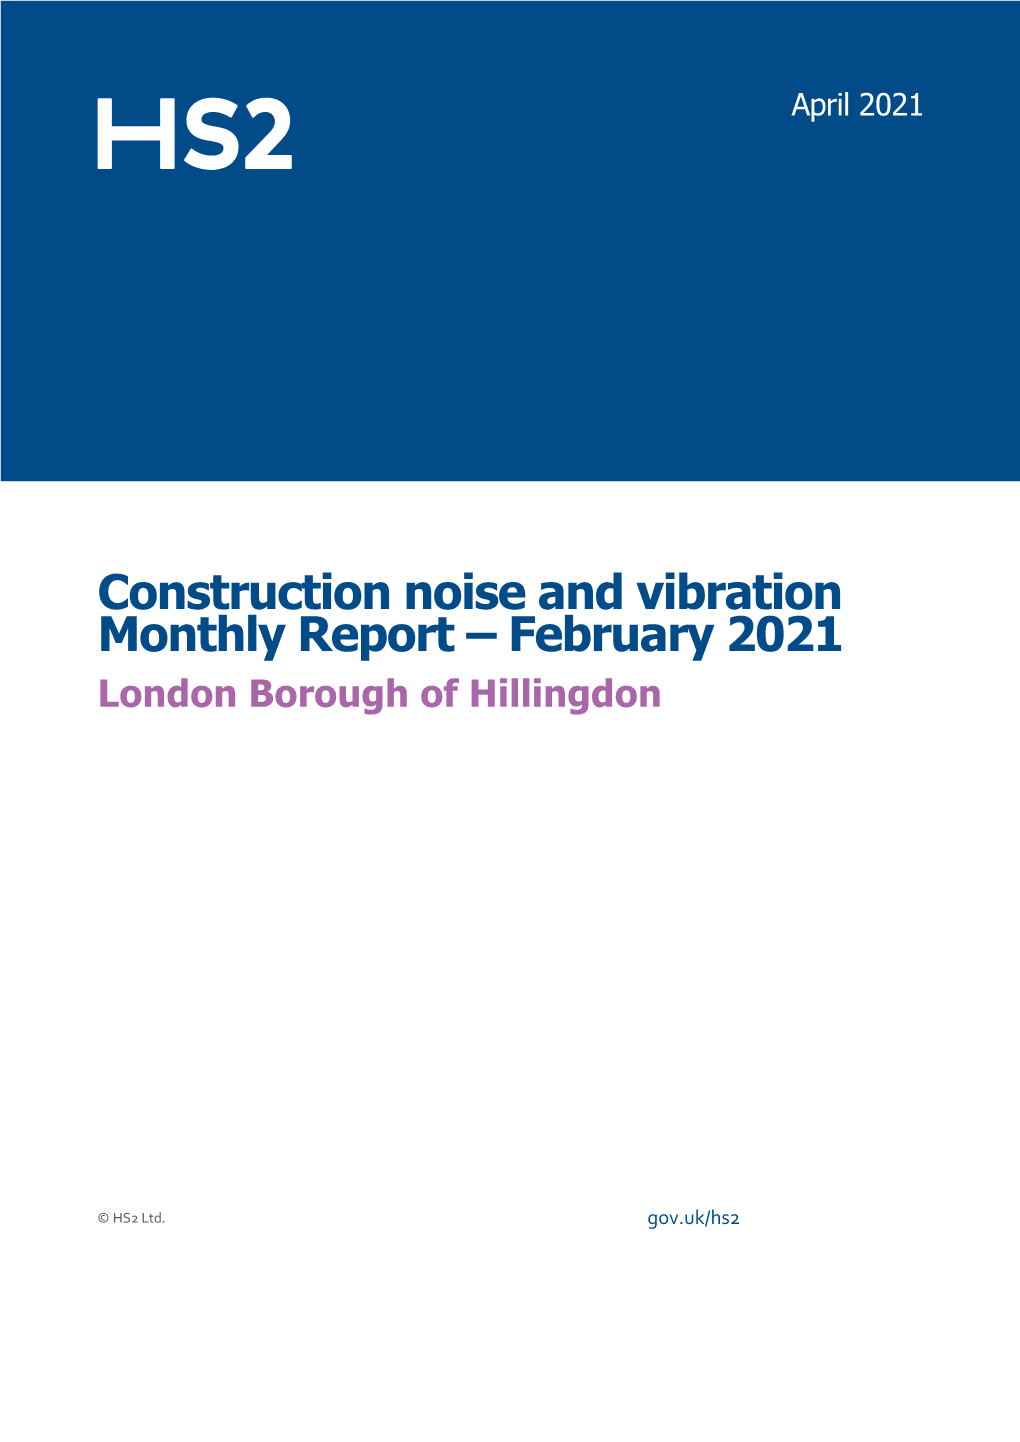 Construction Noise and Vibration Monthly Report – February 2021 London Borough of Hillingdon